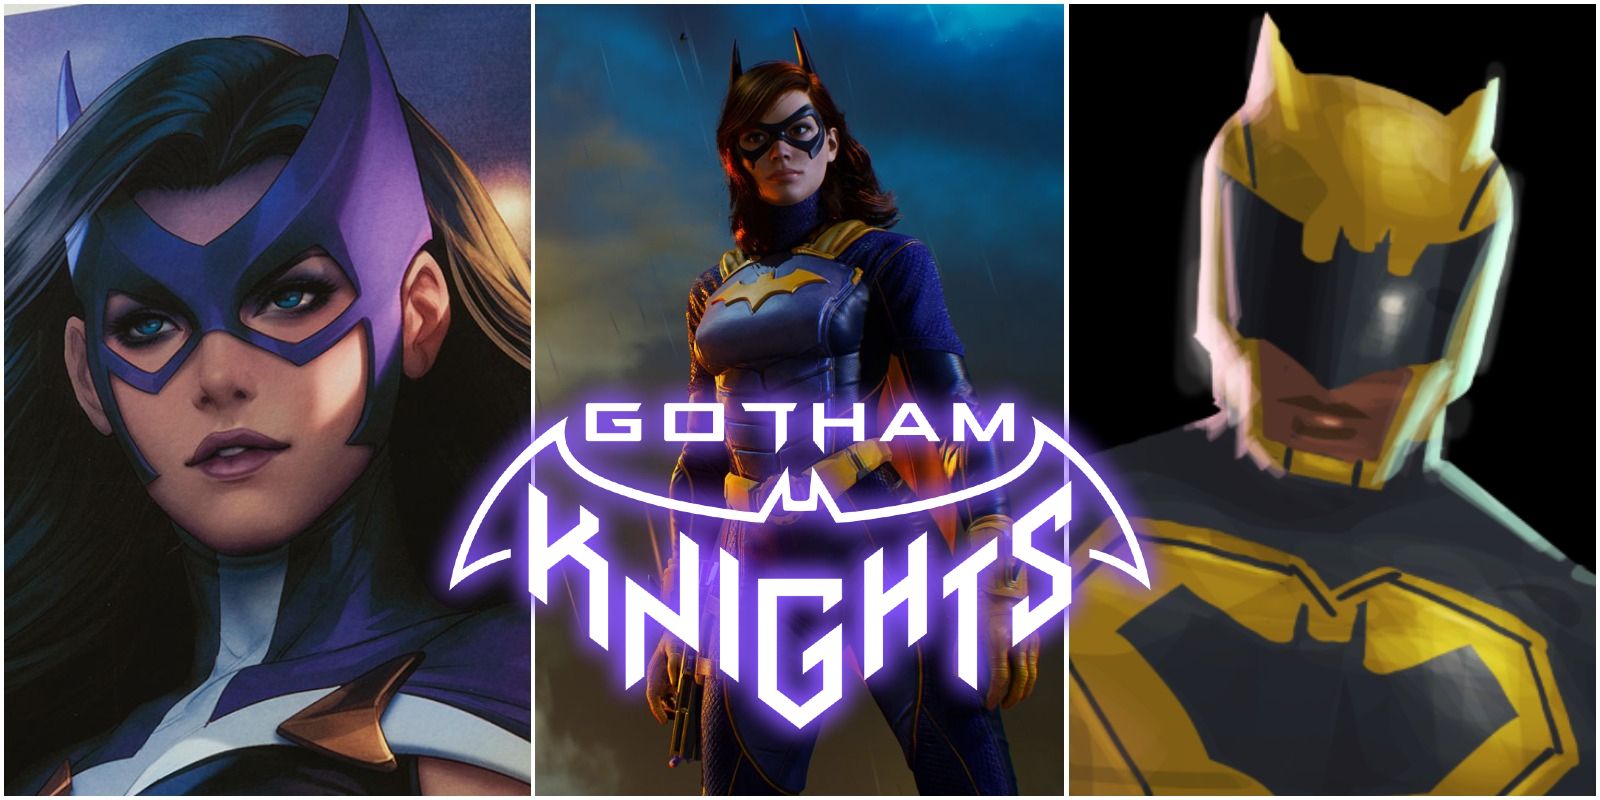 Will 'Gotham Knights' Have a DLC? What We Know